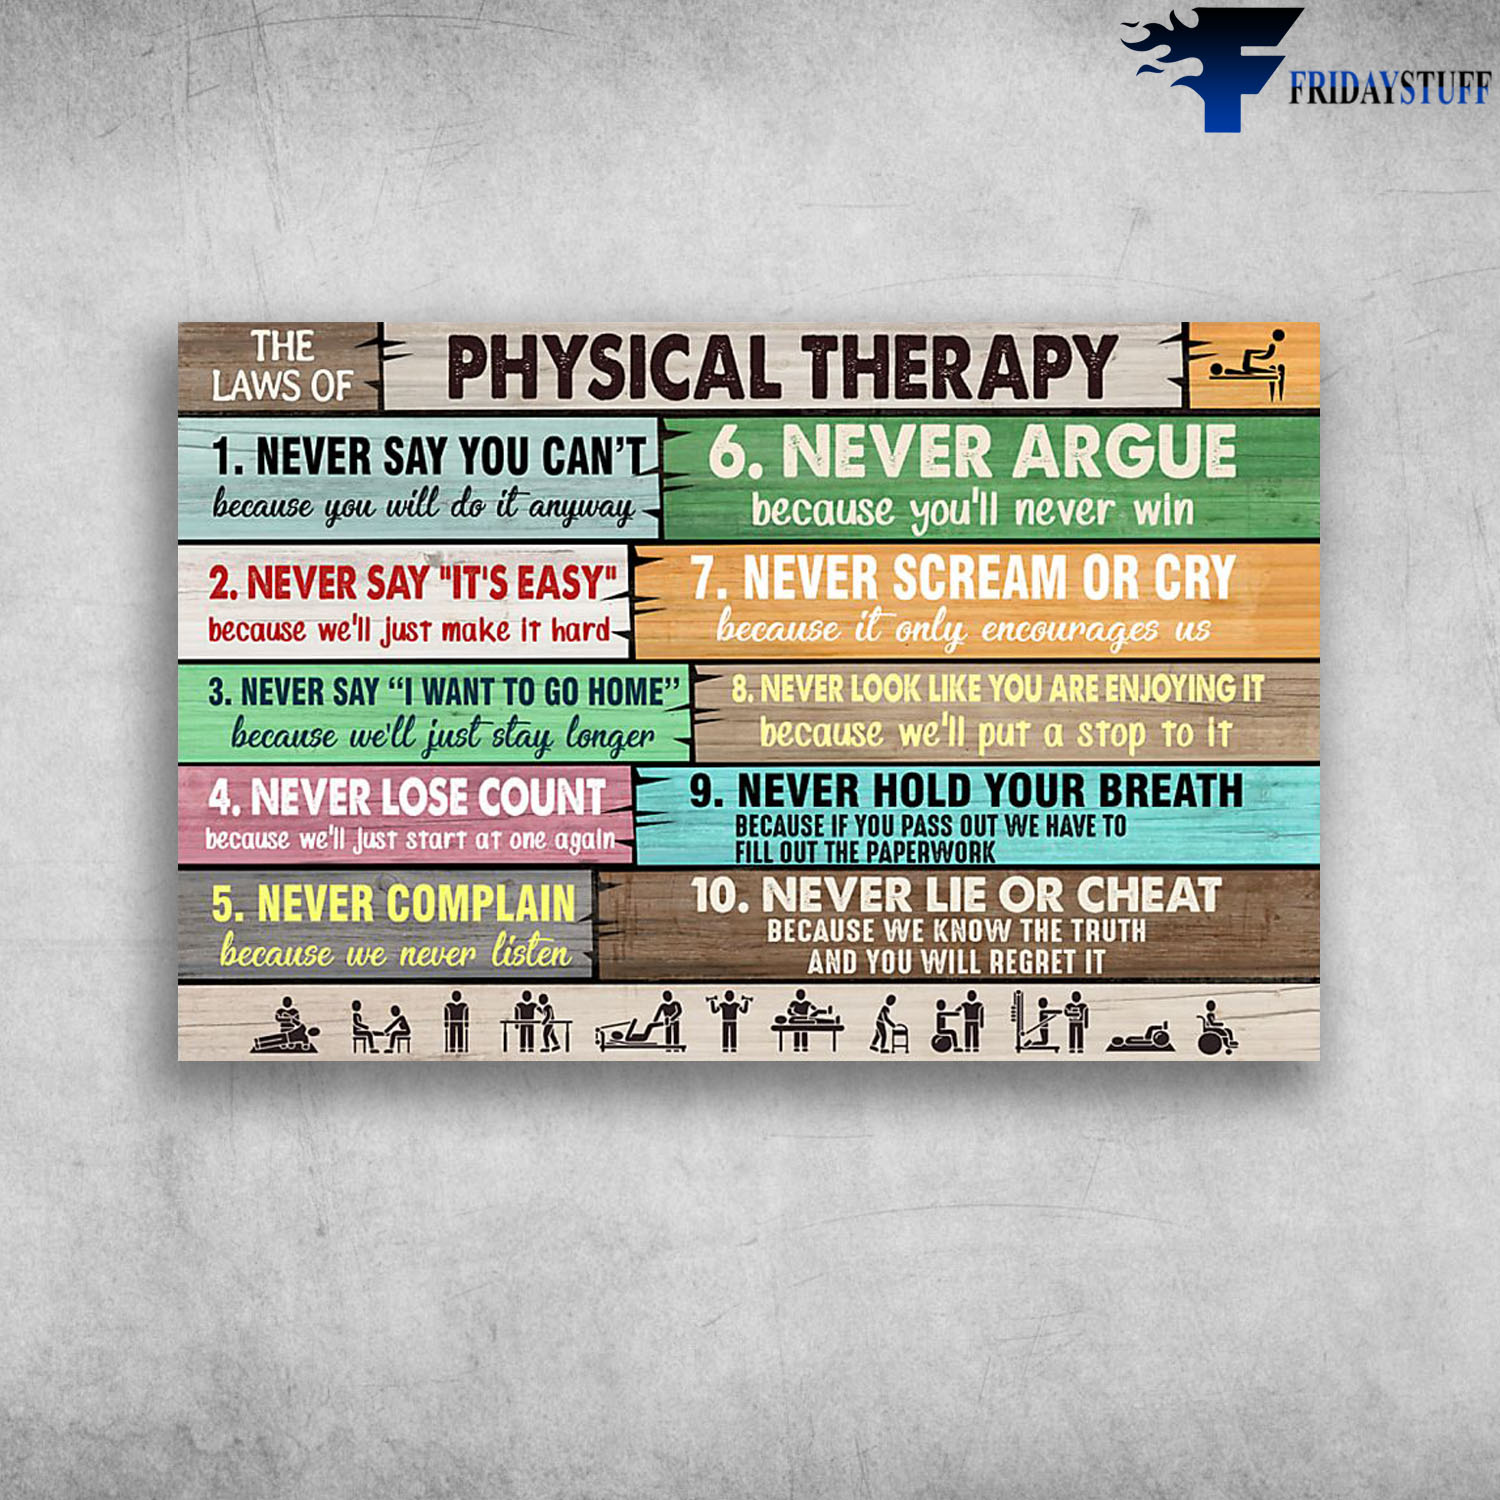 The Laws Of Physical Therapy Never Say You Can't Because You Will Do It Anyway